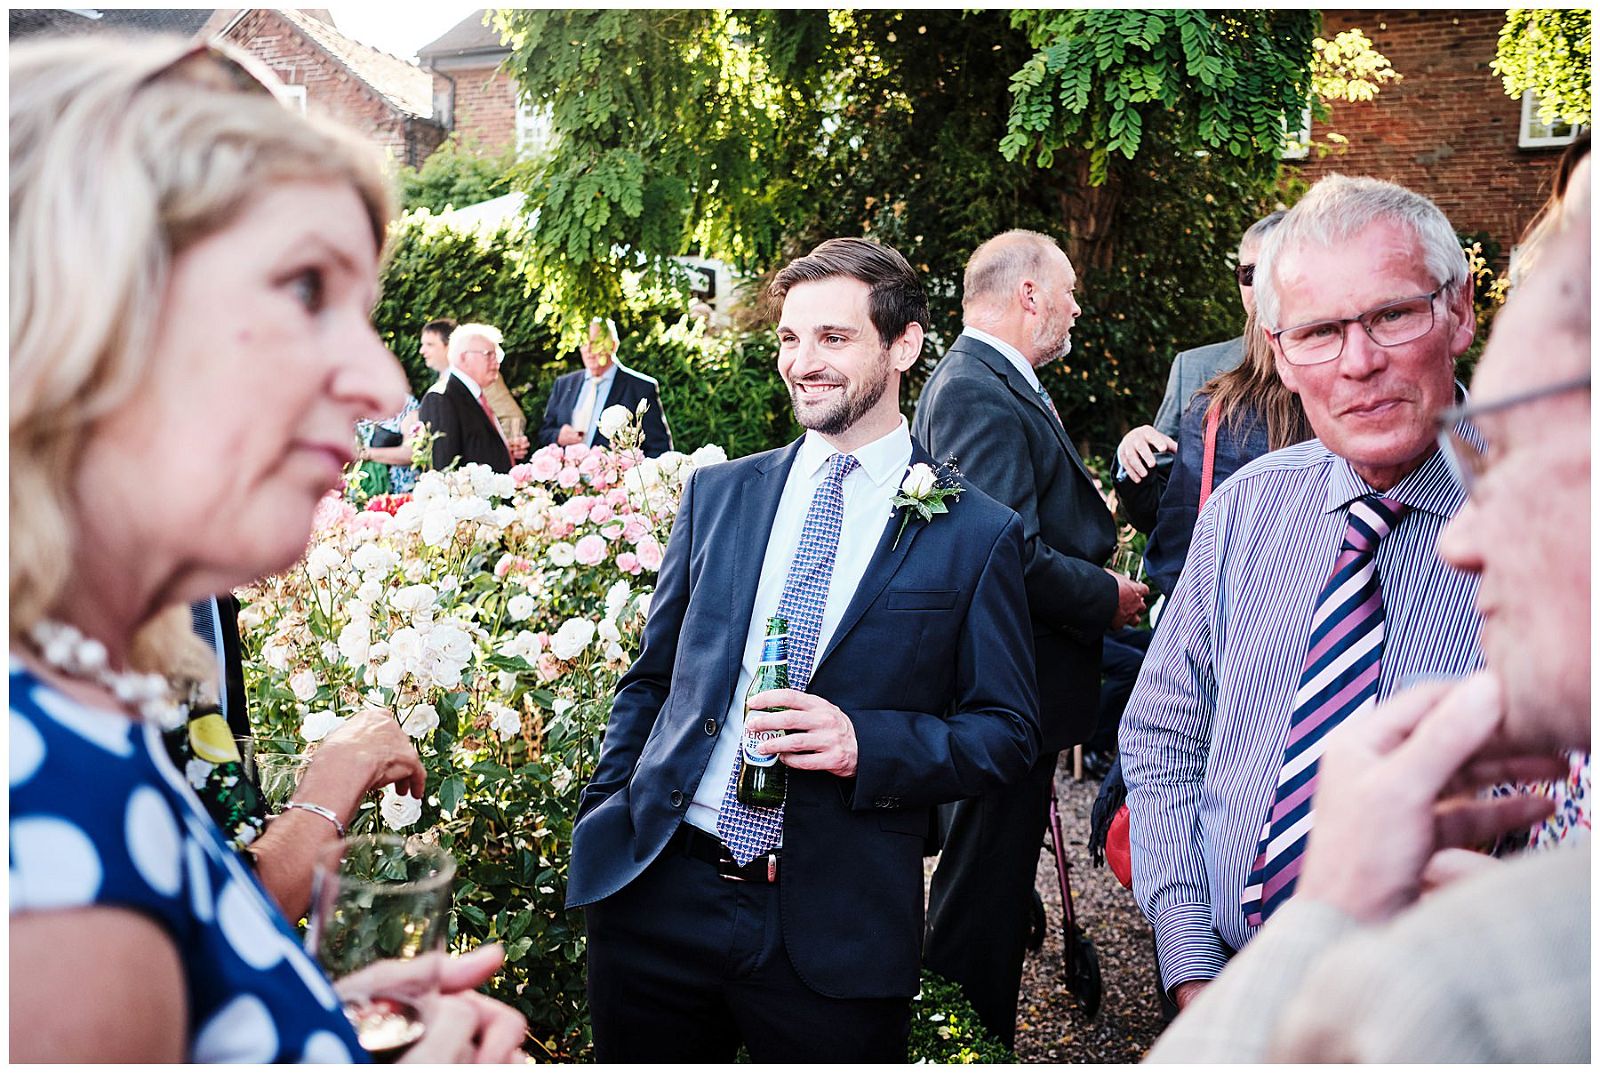 Candid photographs of the guests enjoying the wedding drinks reception in the summer sun at Goldstone Hall in Shropshire by Documentary Wedding Photographer Stuart James